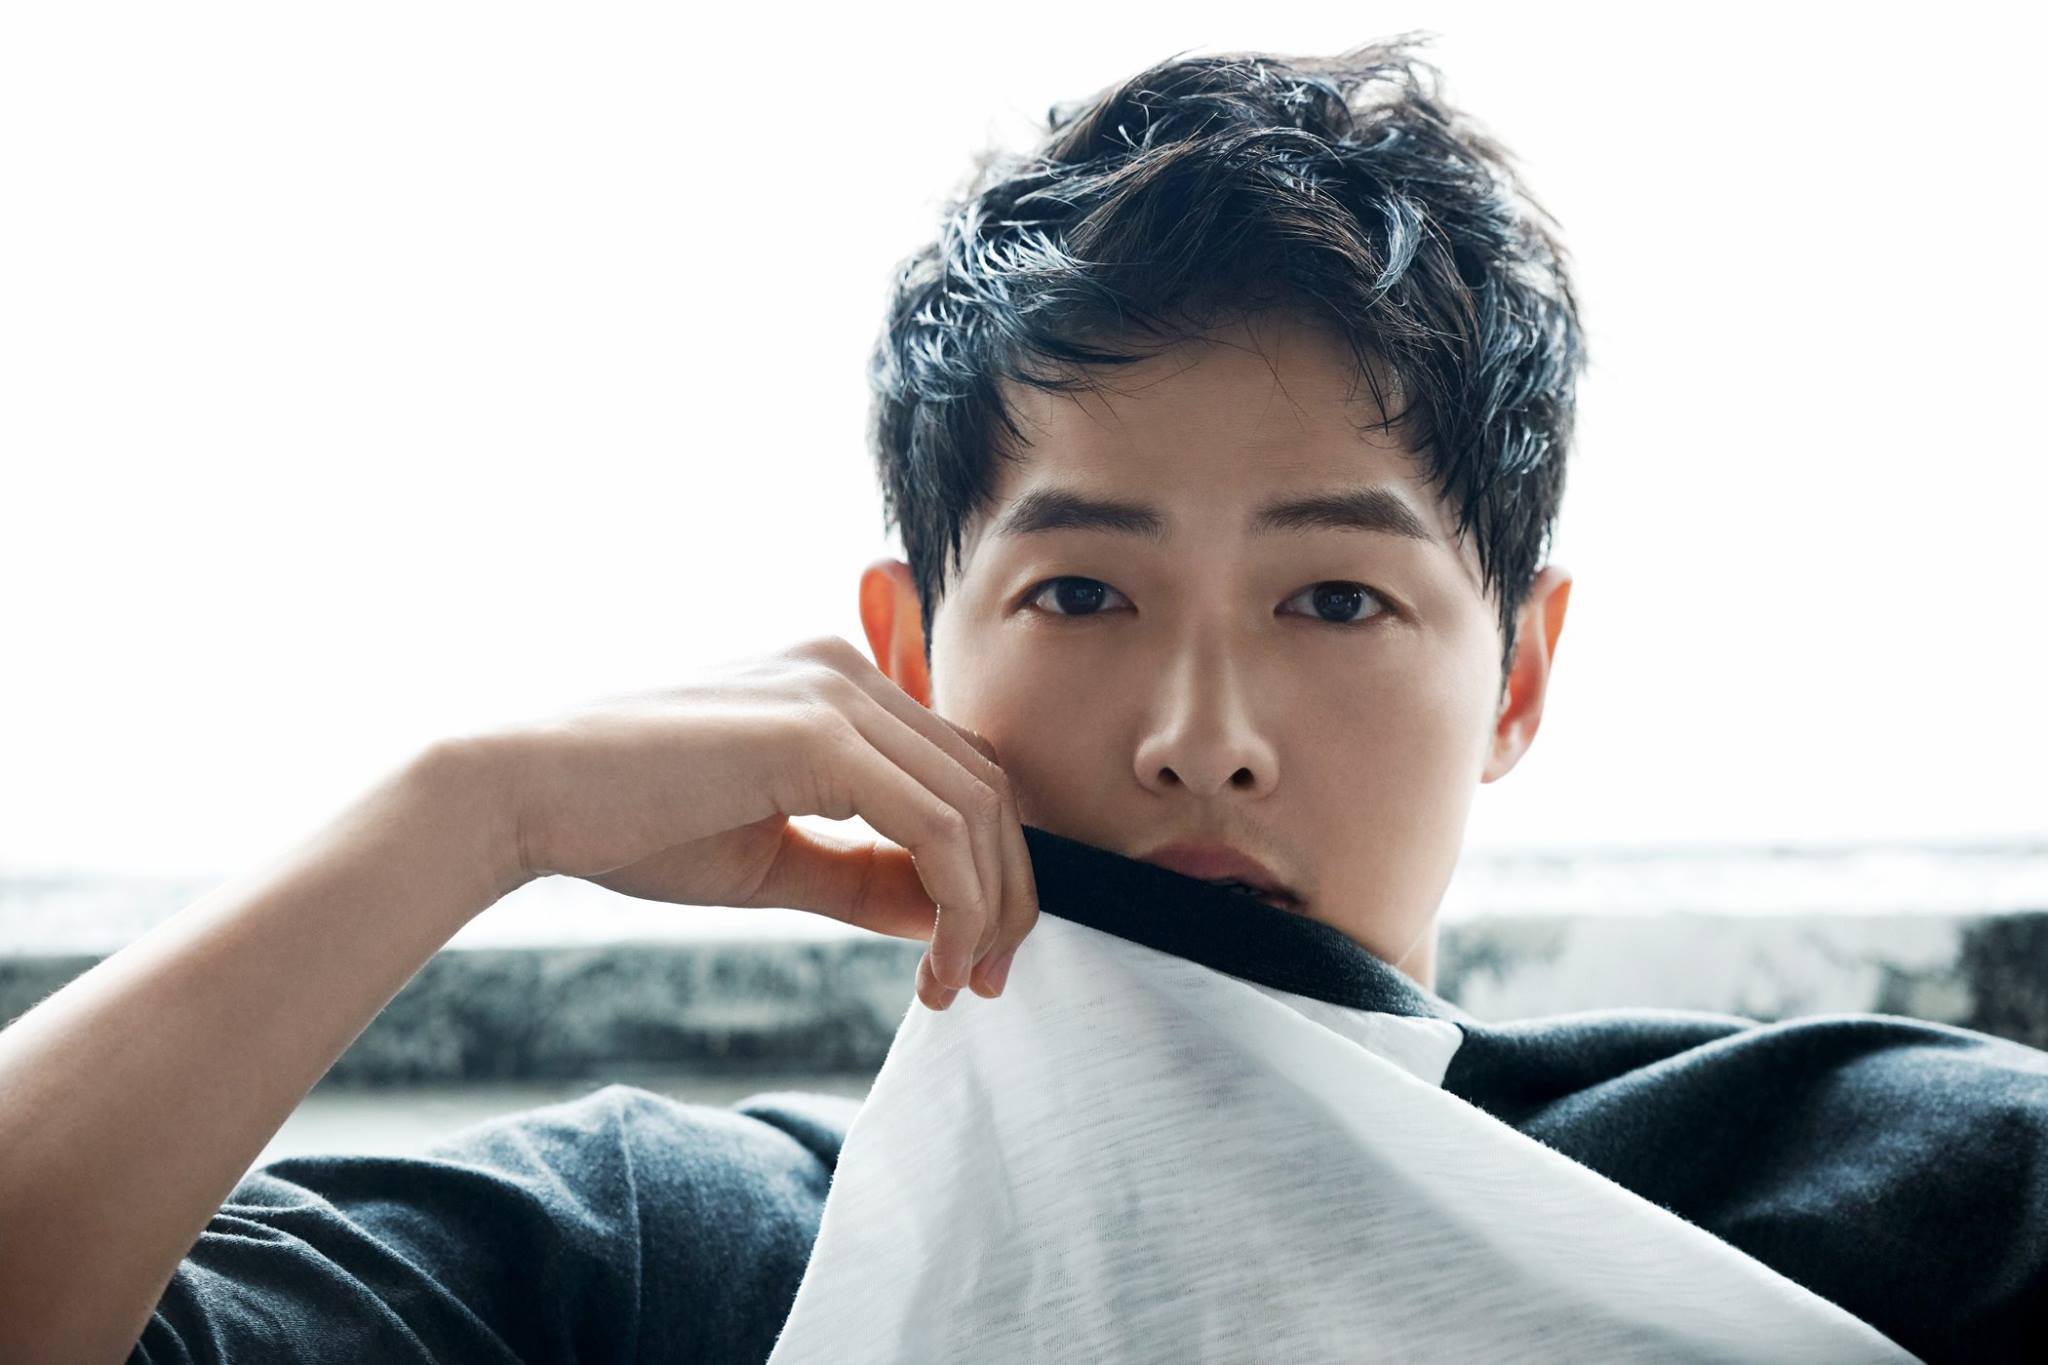 Song Joong Ki Wallpapers Image Photos Pictures Backgrounds.